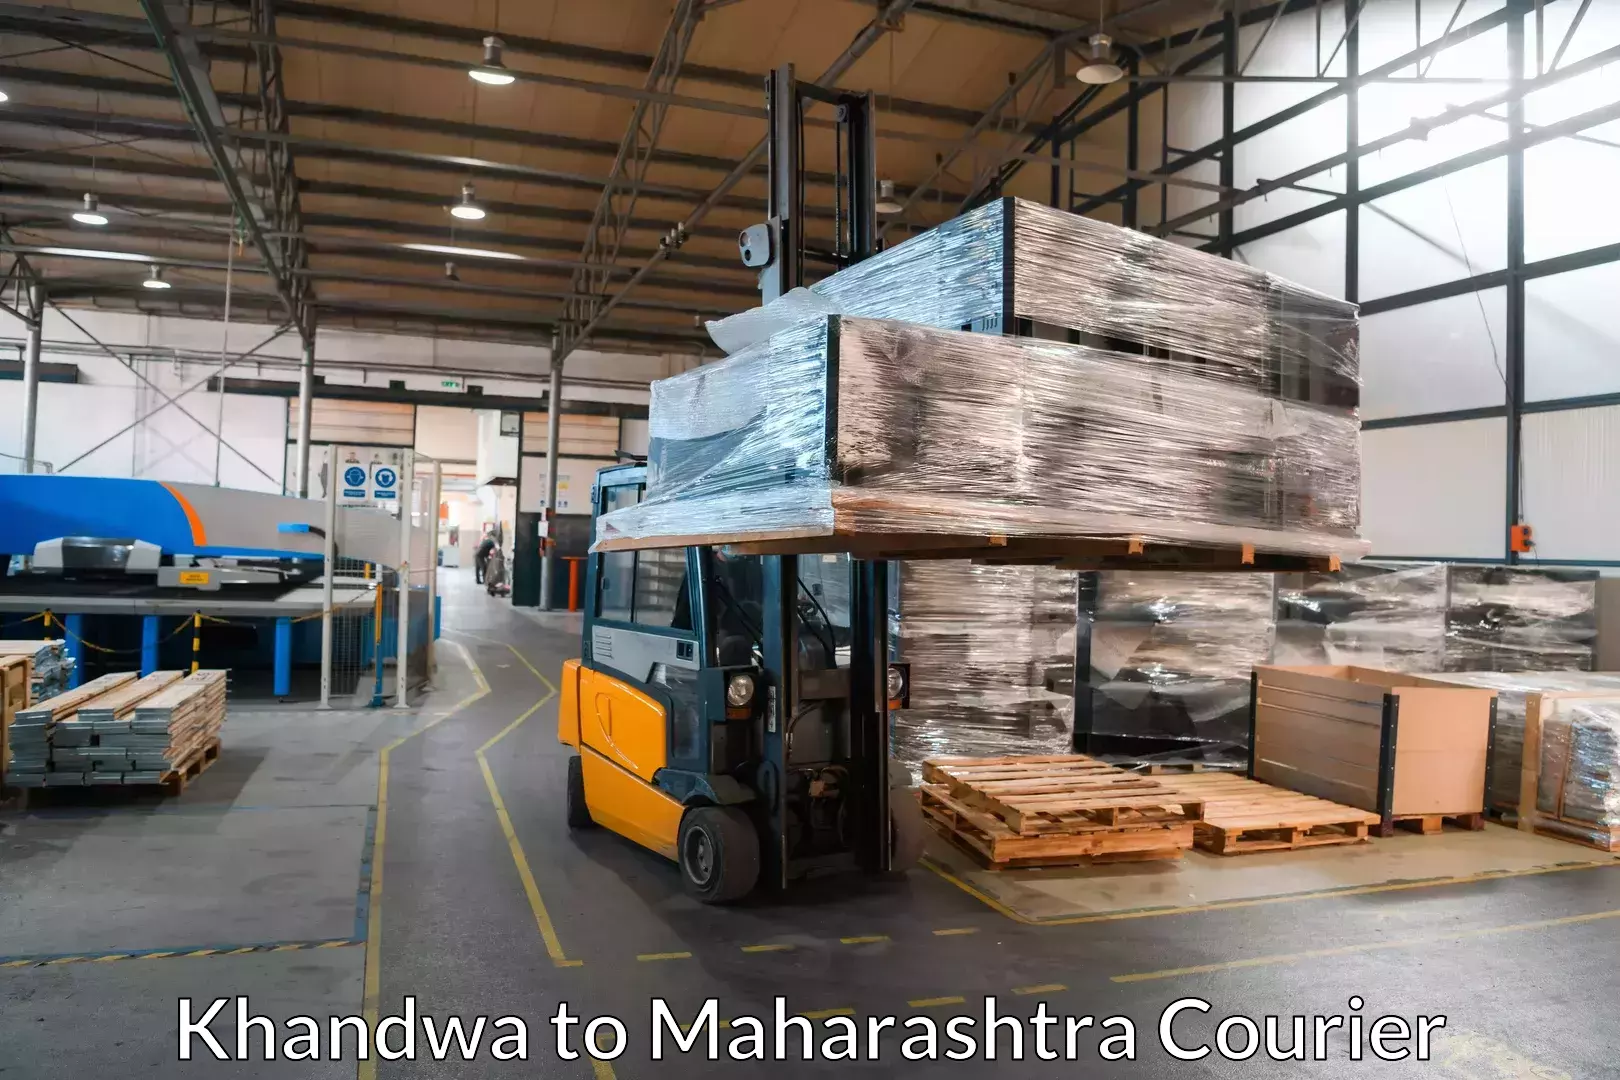 Professional moving assistance in Khandwa to Ballarpur